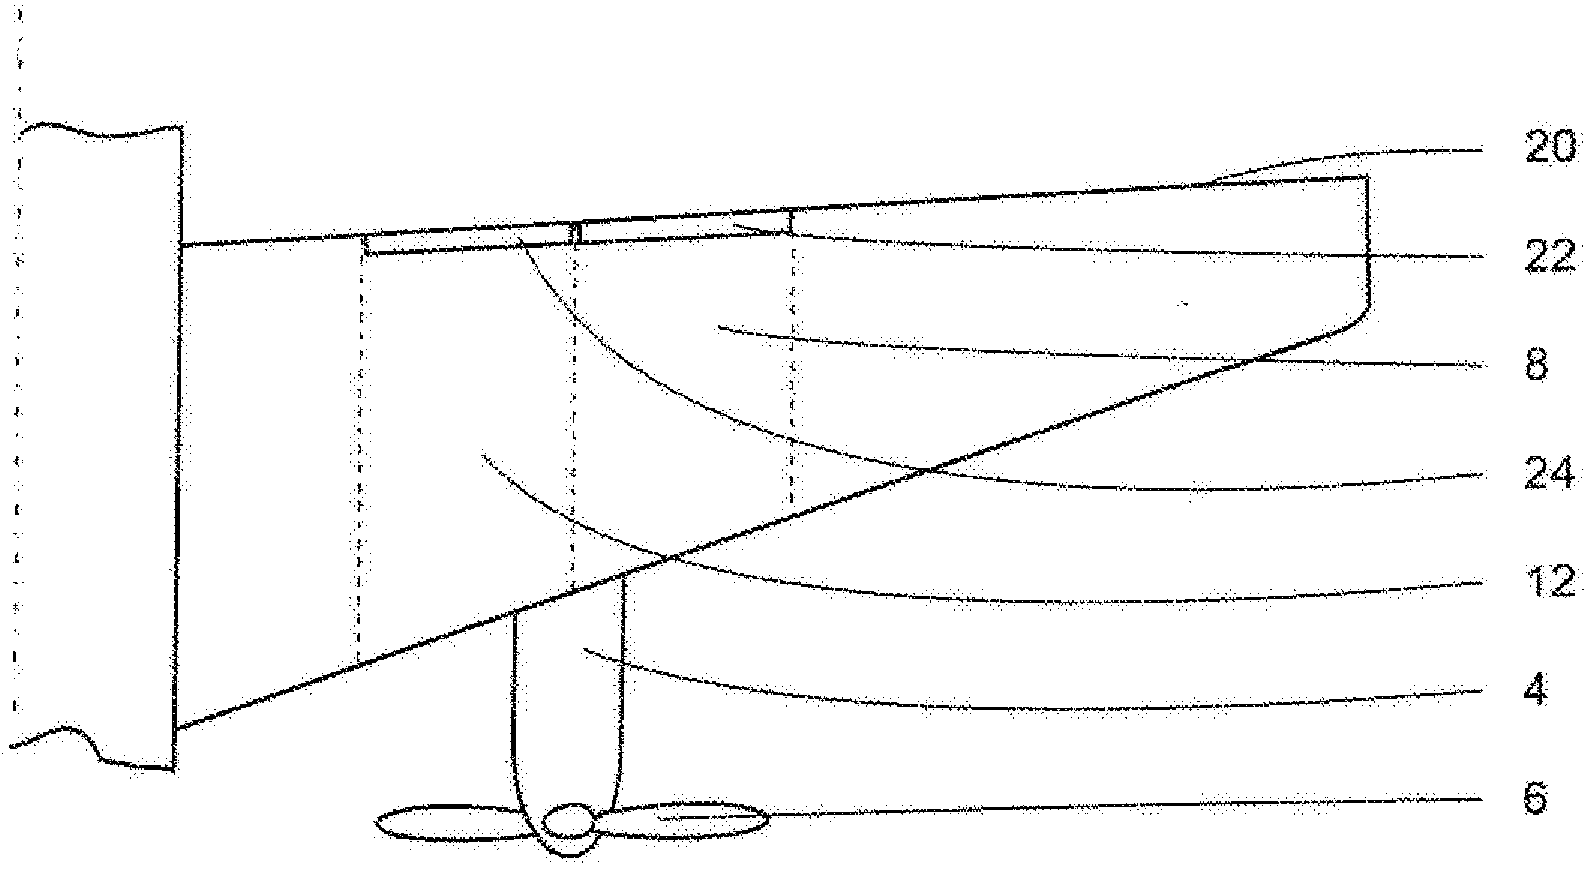 Wing and method for reducing effects of propeller airflow on lift distribution